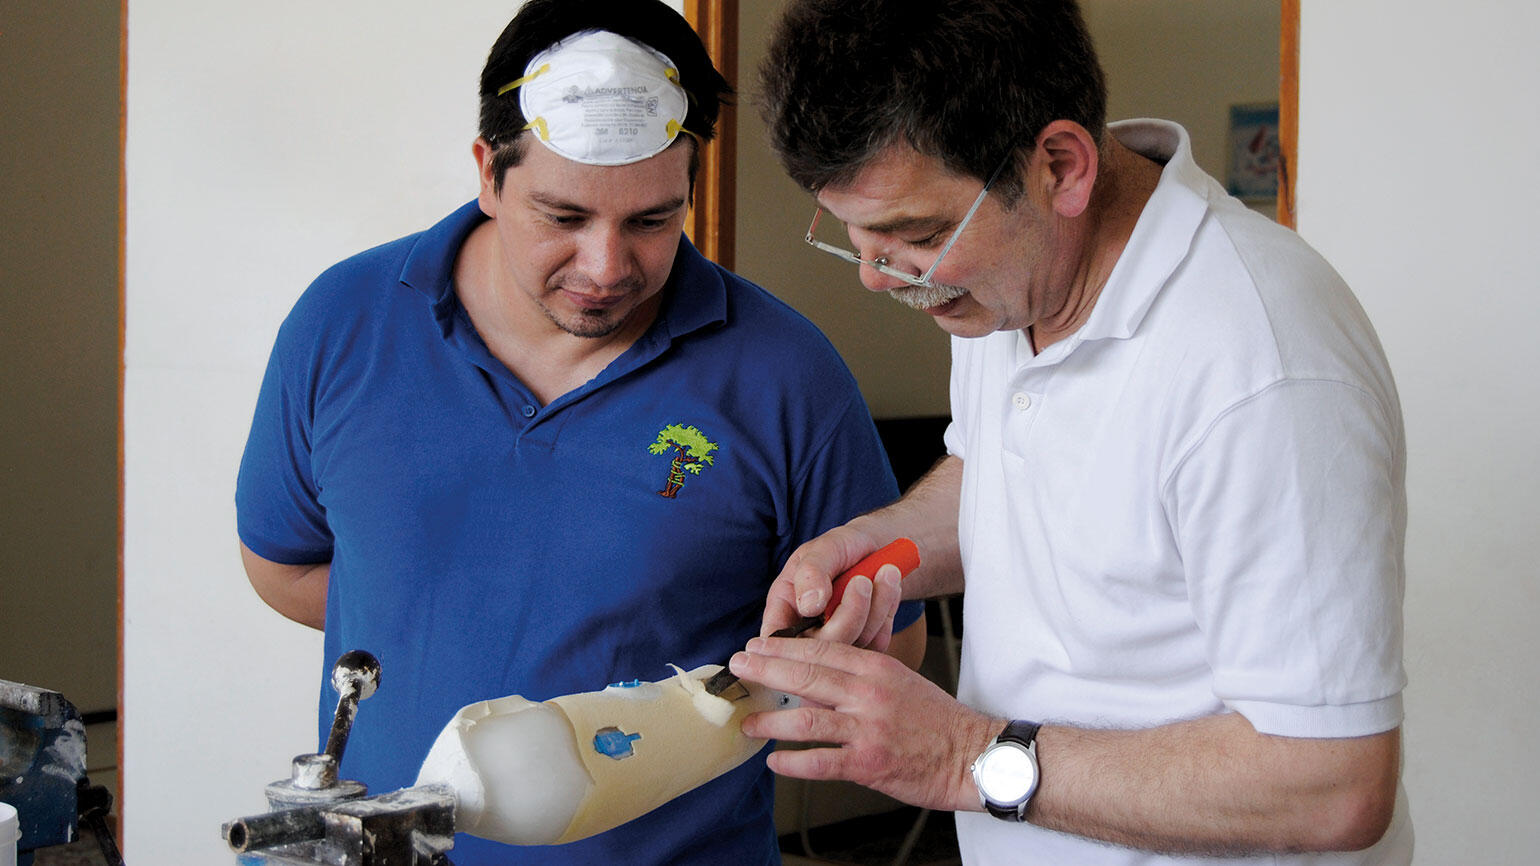 Trainee observes trainer working on an artificial limb 